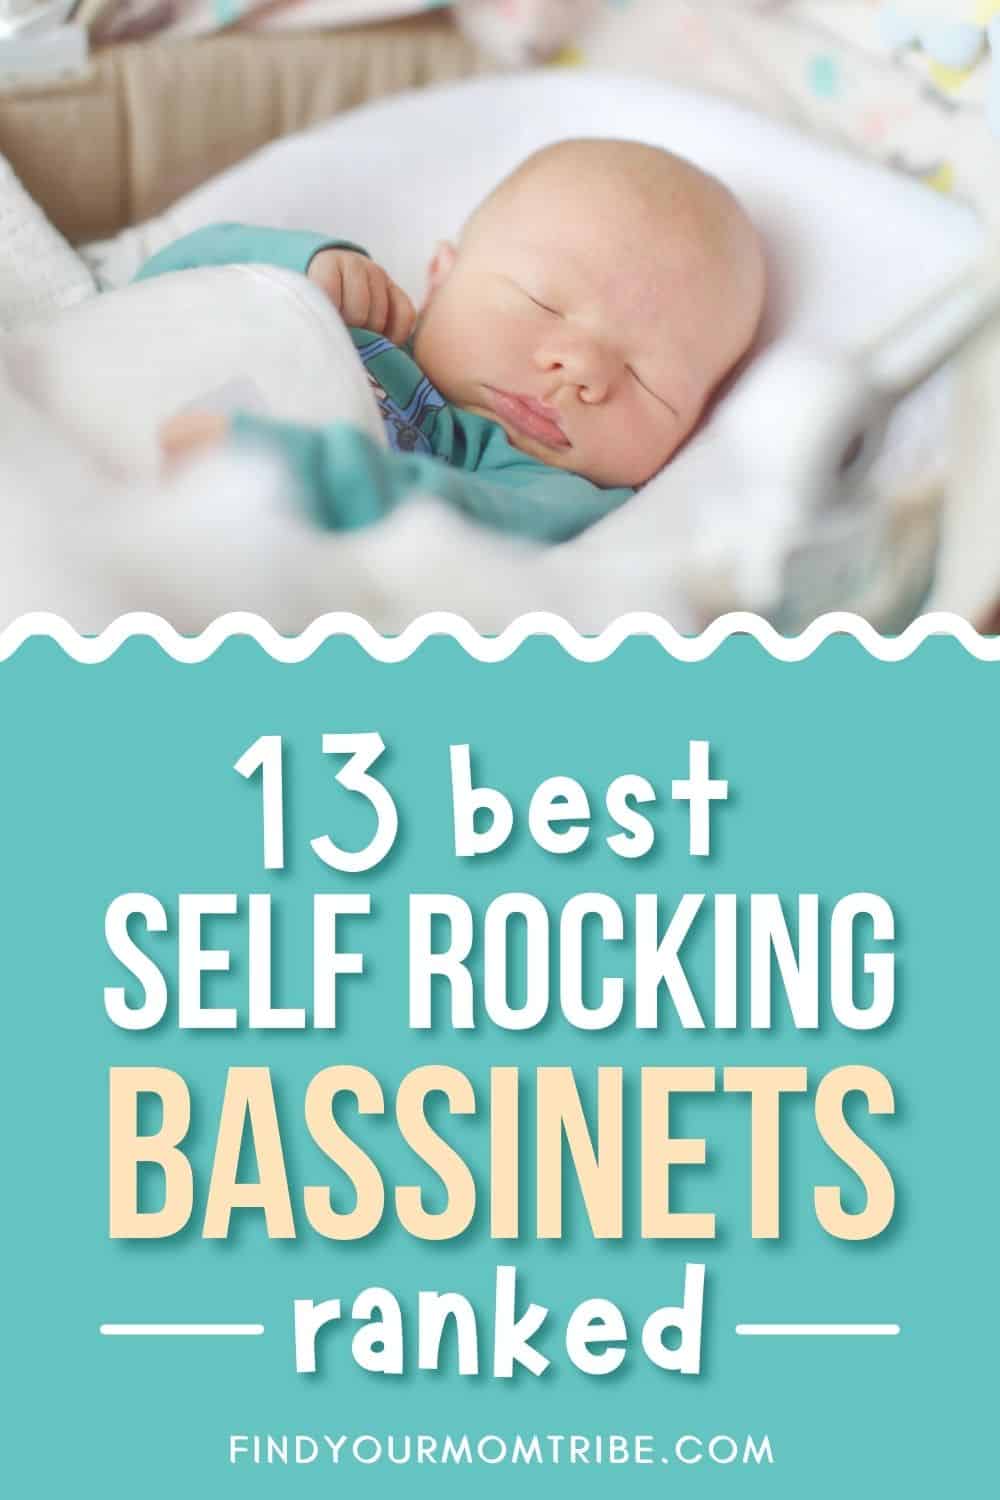 13 Best Self Rocking Bassinets In 2021 Ranked (Reviews) Pinterest